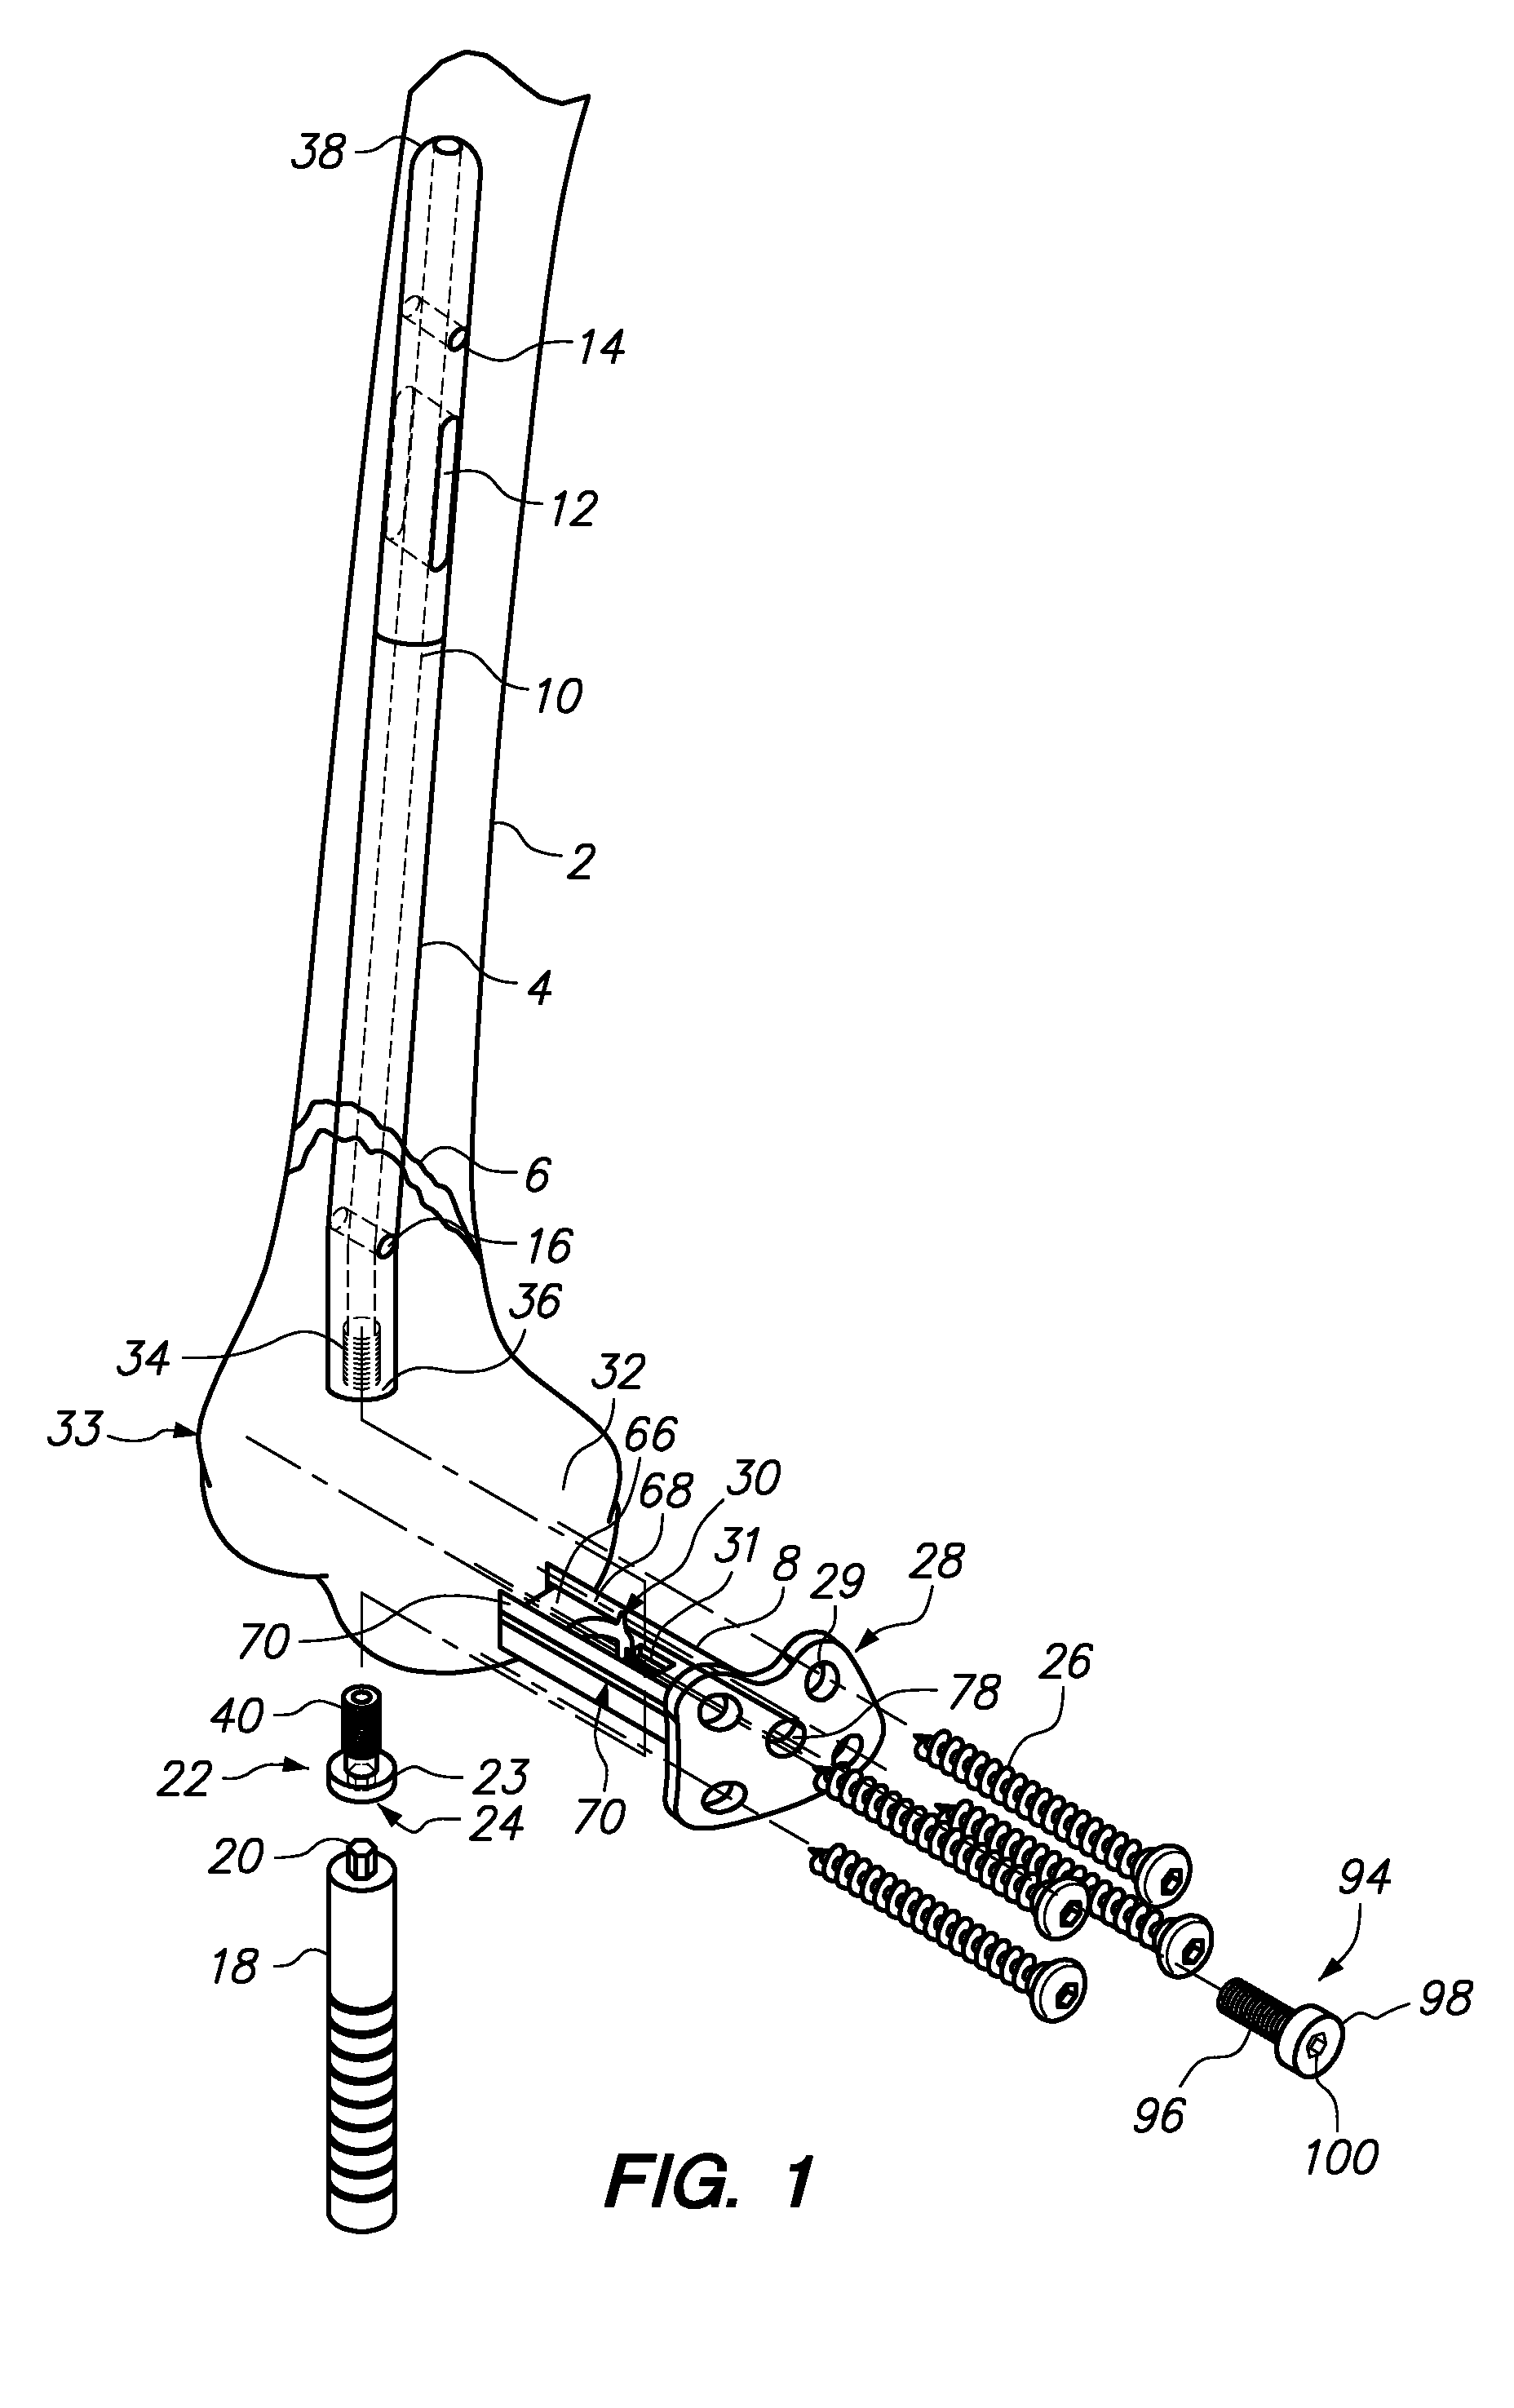 Bone Fixation Assemblies and Methods of Use